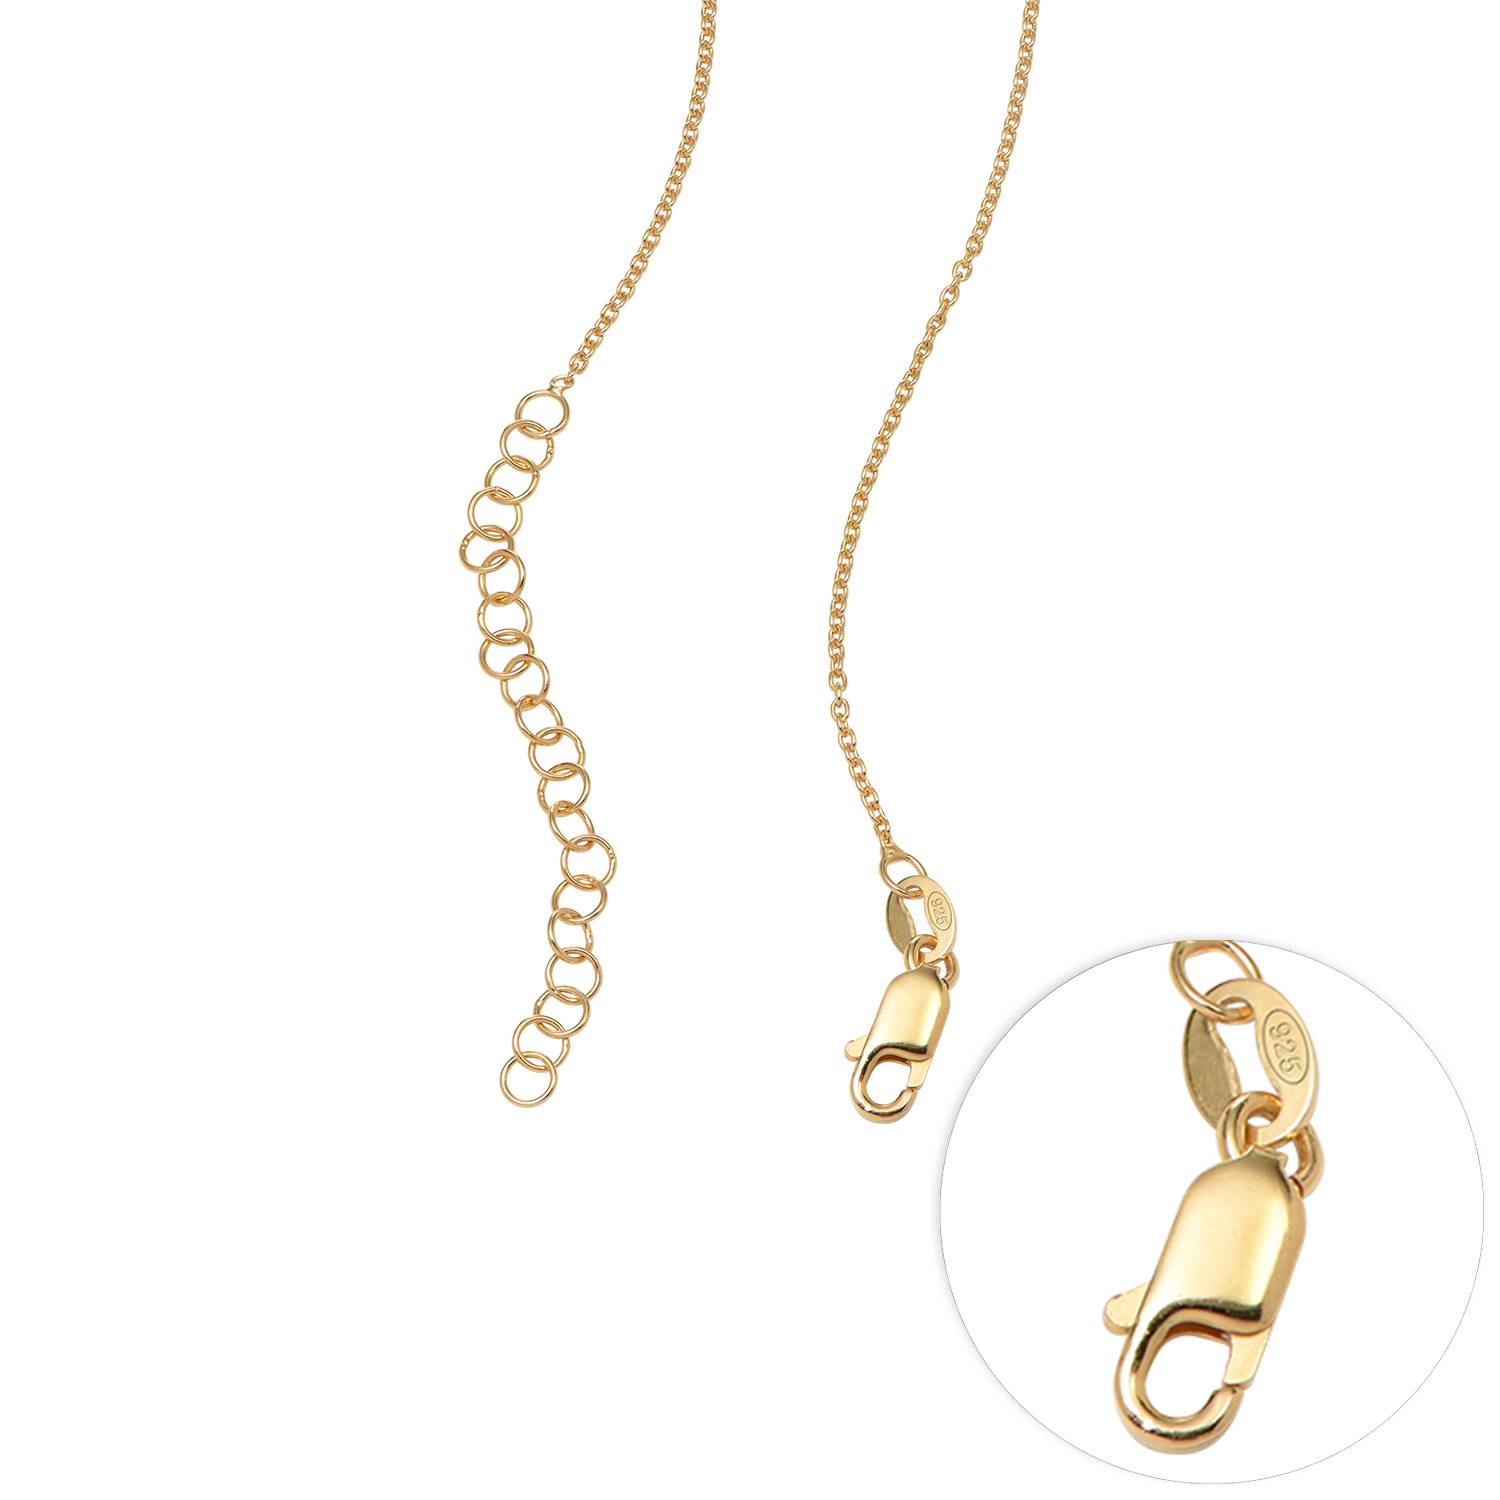 Linda Charm Necklace with Pearl in 18ct Gold Vermeil-5 product photo